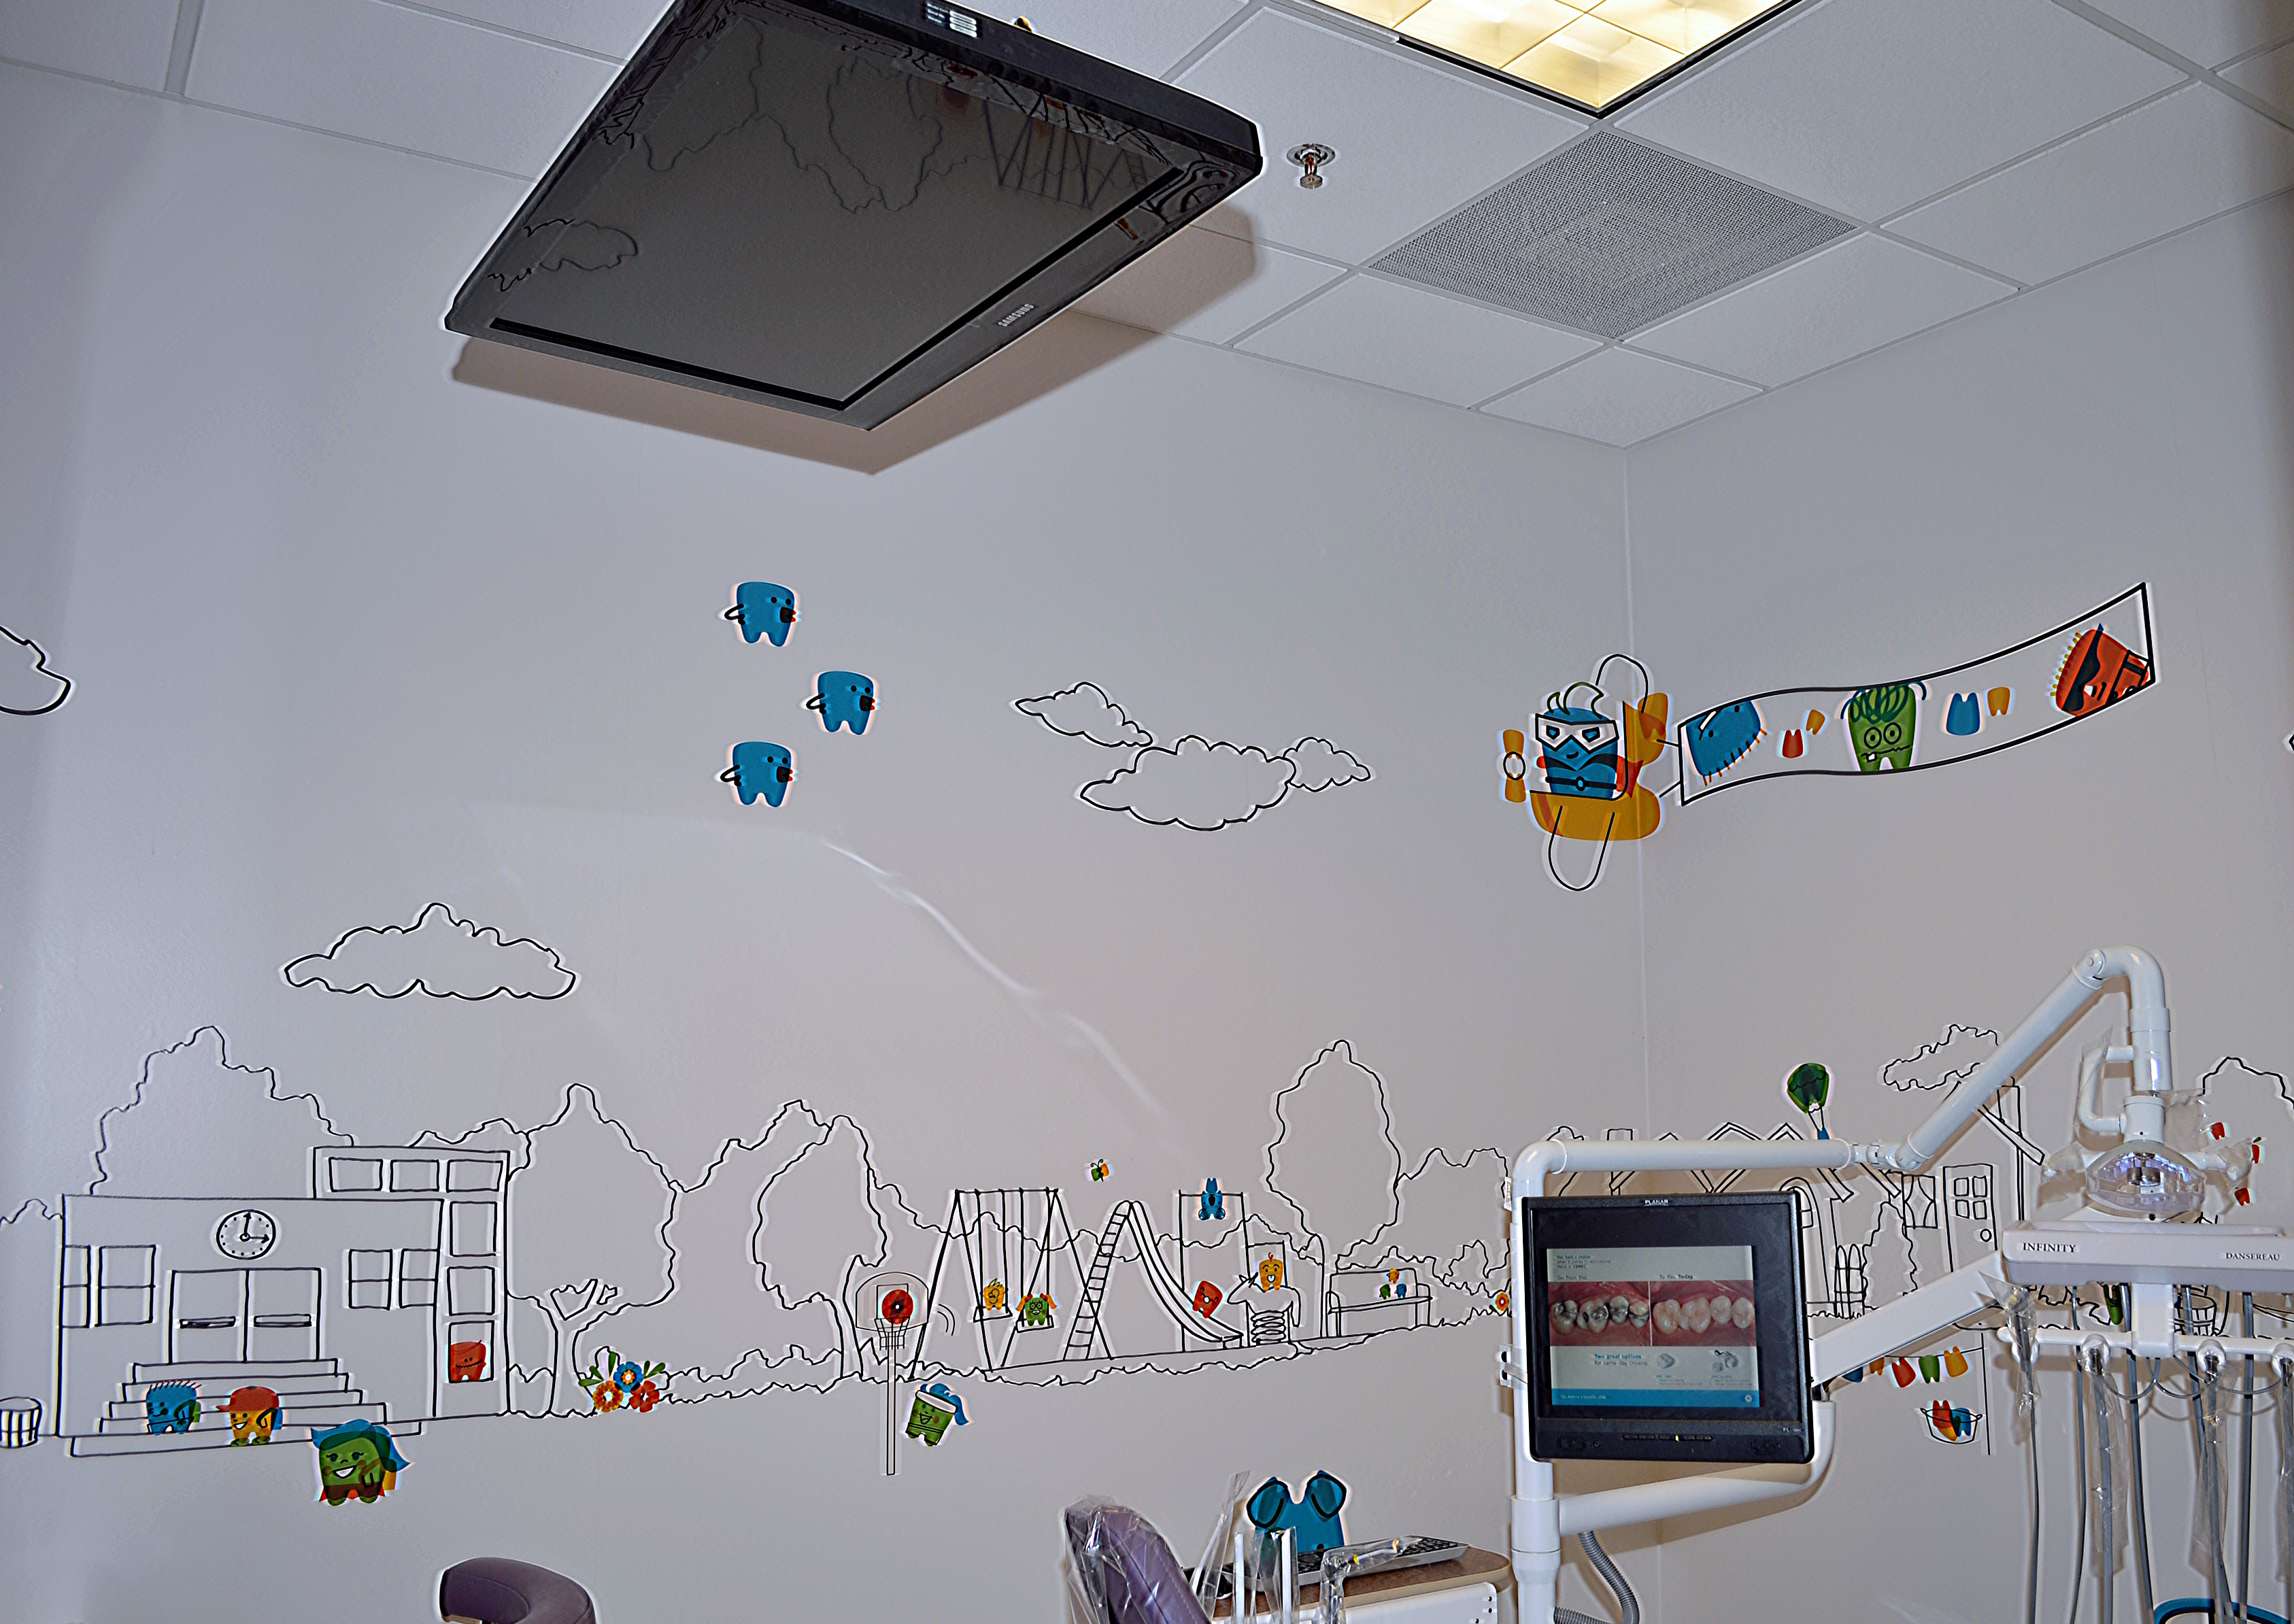 San Tan Valley Kids' Dentistry and Orthodontics opened its doors to the Queen Creek community in June 2012.